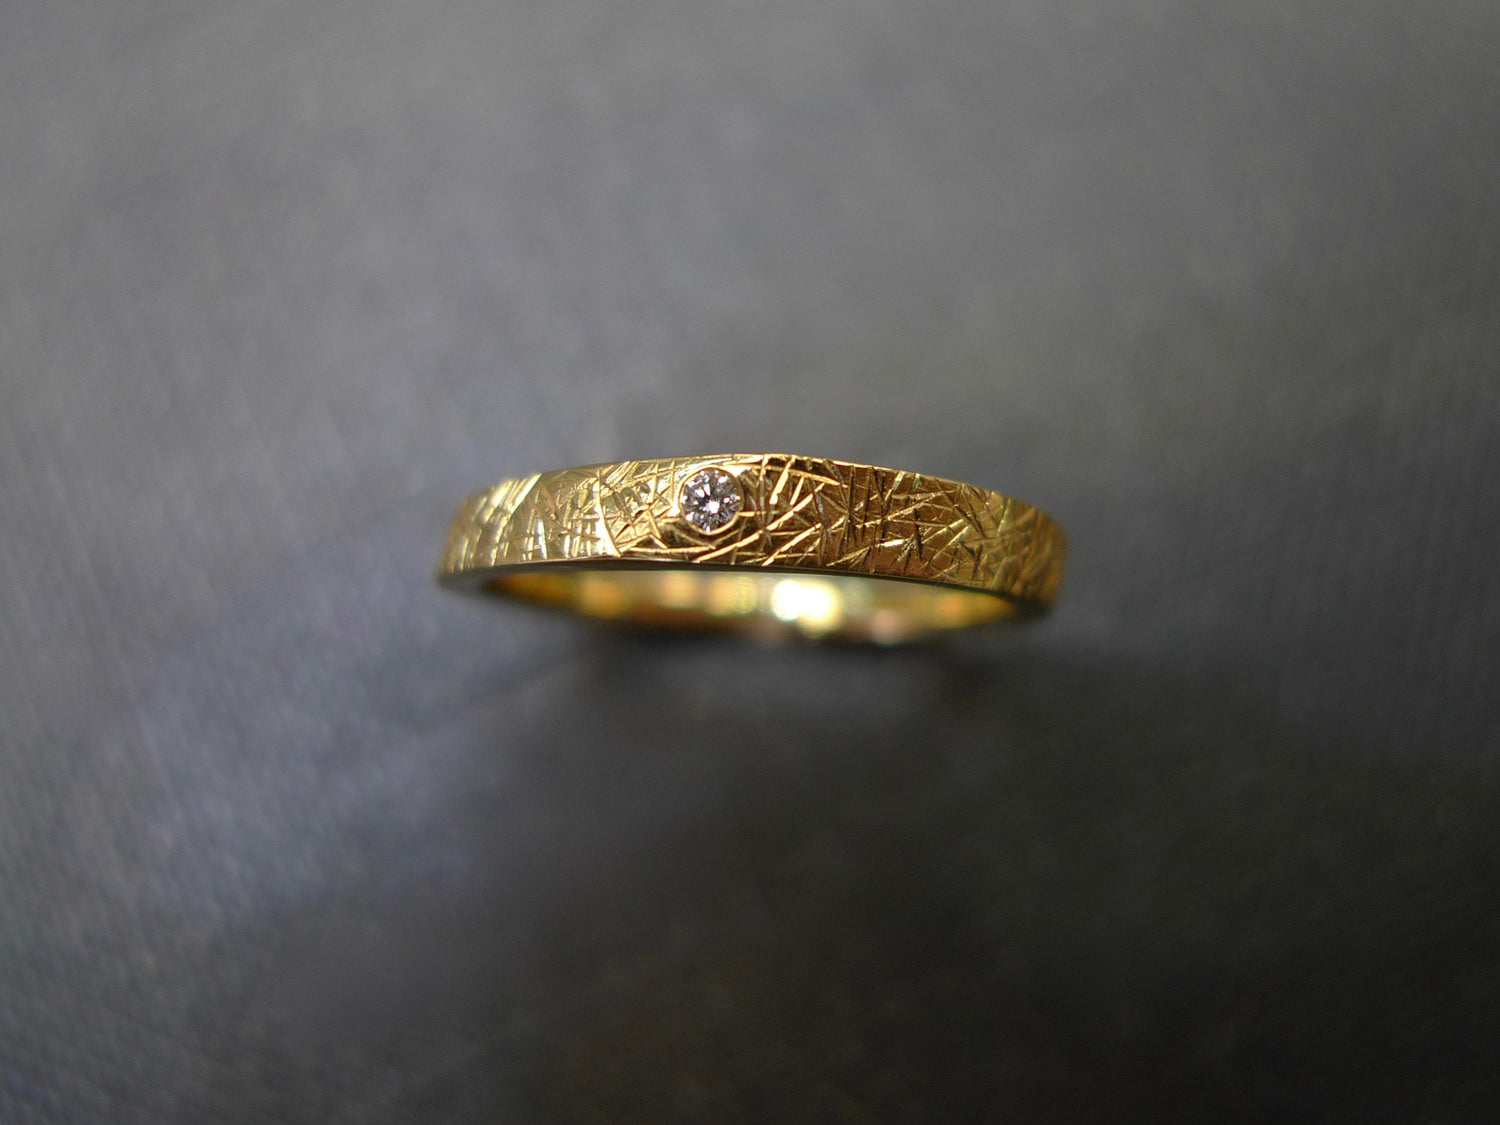 Hand Carved Diamond Wedding Ring in 18K Yellow Gold - HN JEWELRY